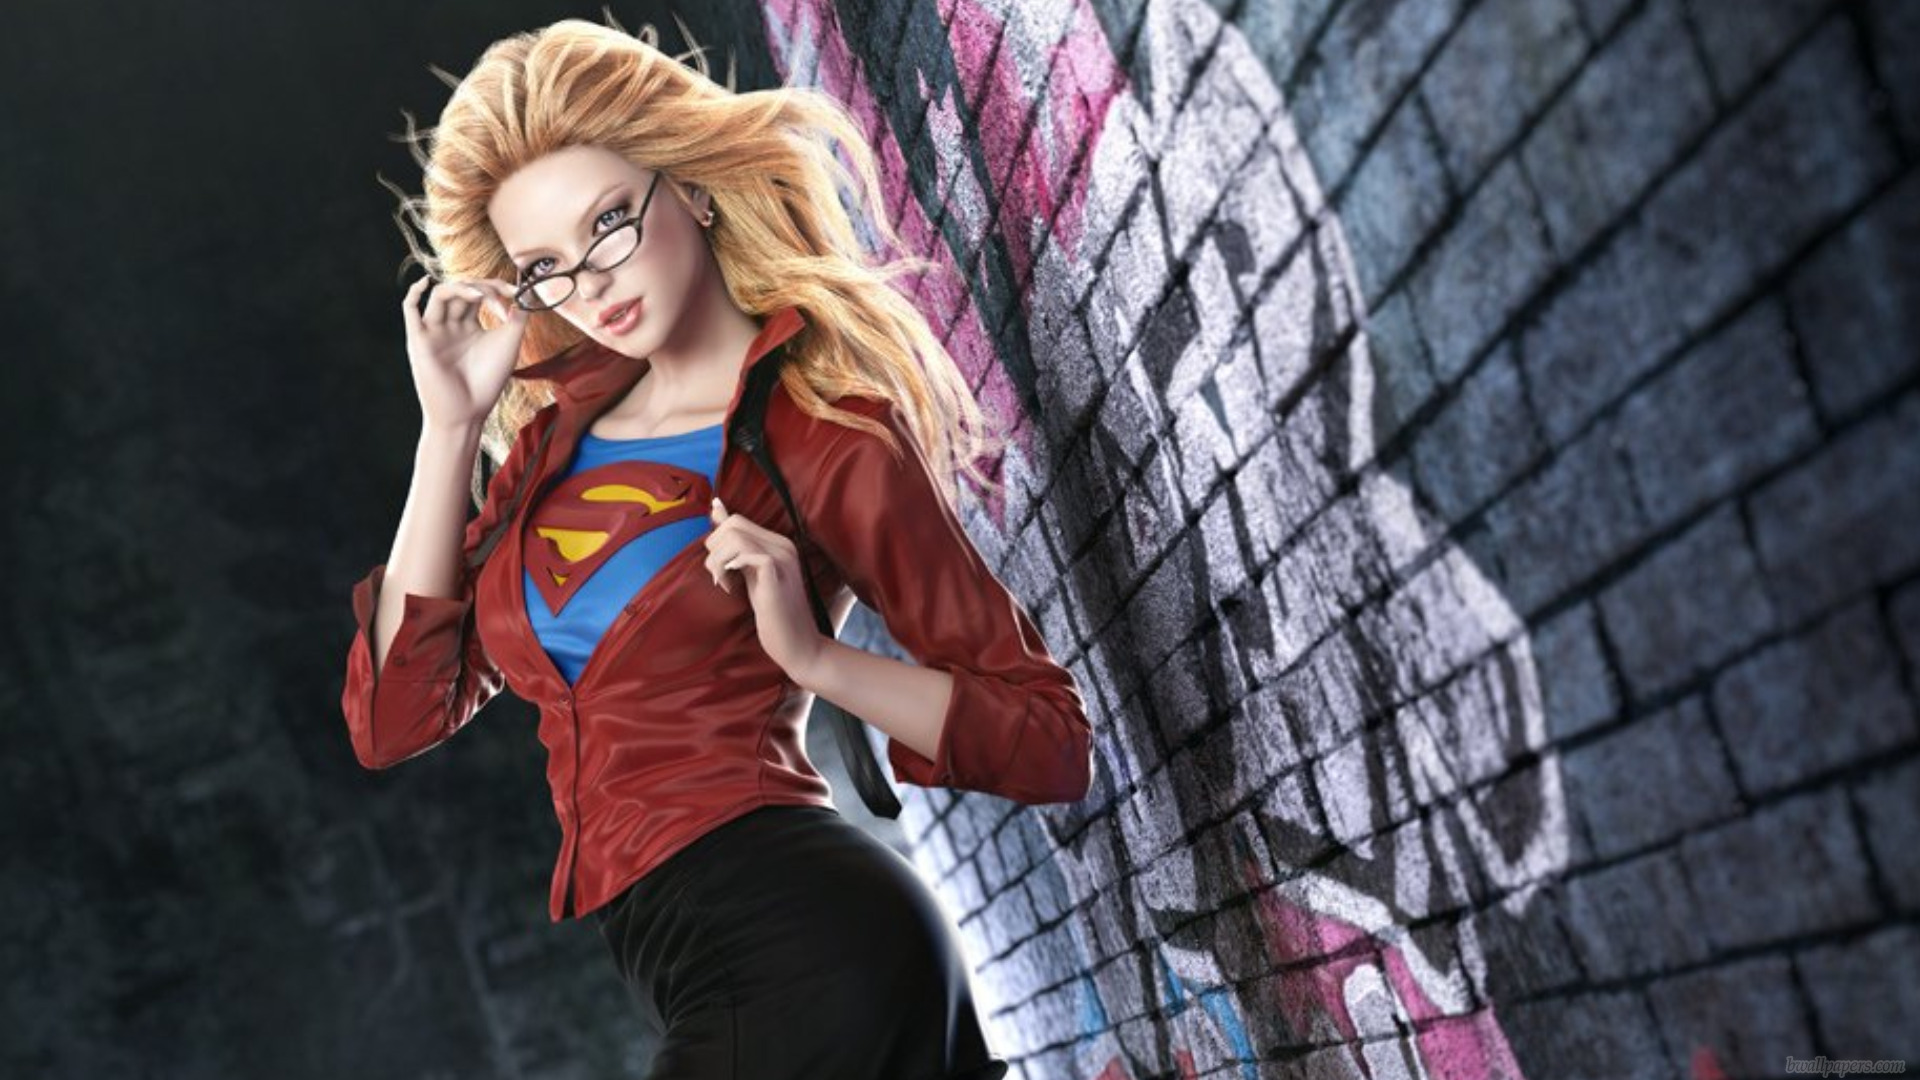 Free Download Supergirl Wallpapers Wallpaper High Definition High